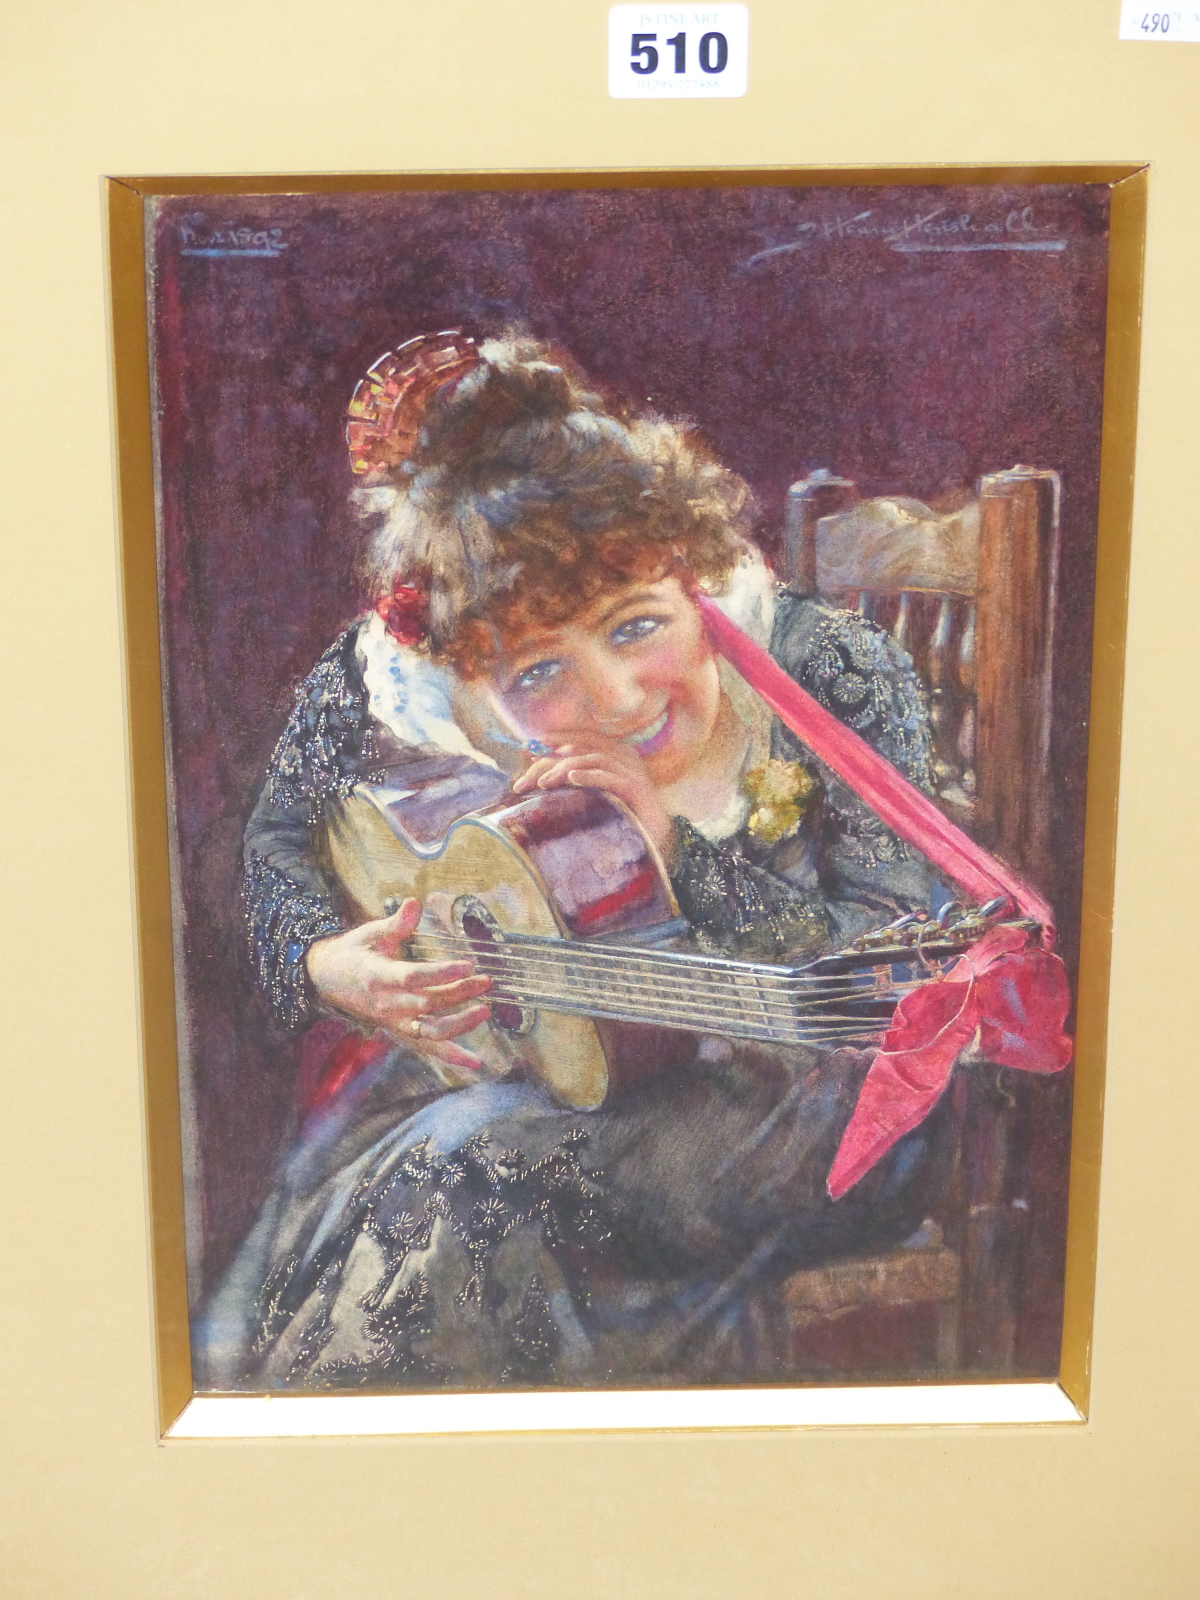 JOHN HENRY HENSHALL (1856-1928), YOUNG GIRL IN A SEQUINNED DRESS WITH A GUITAR, SIGNED UPPER RIGHT - Image 2 of 6